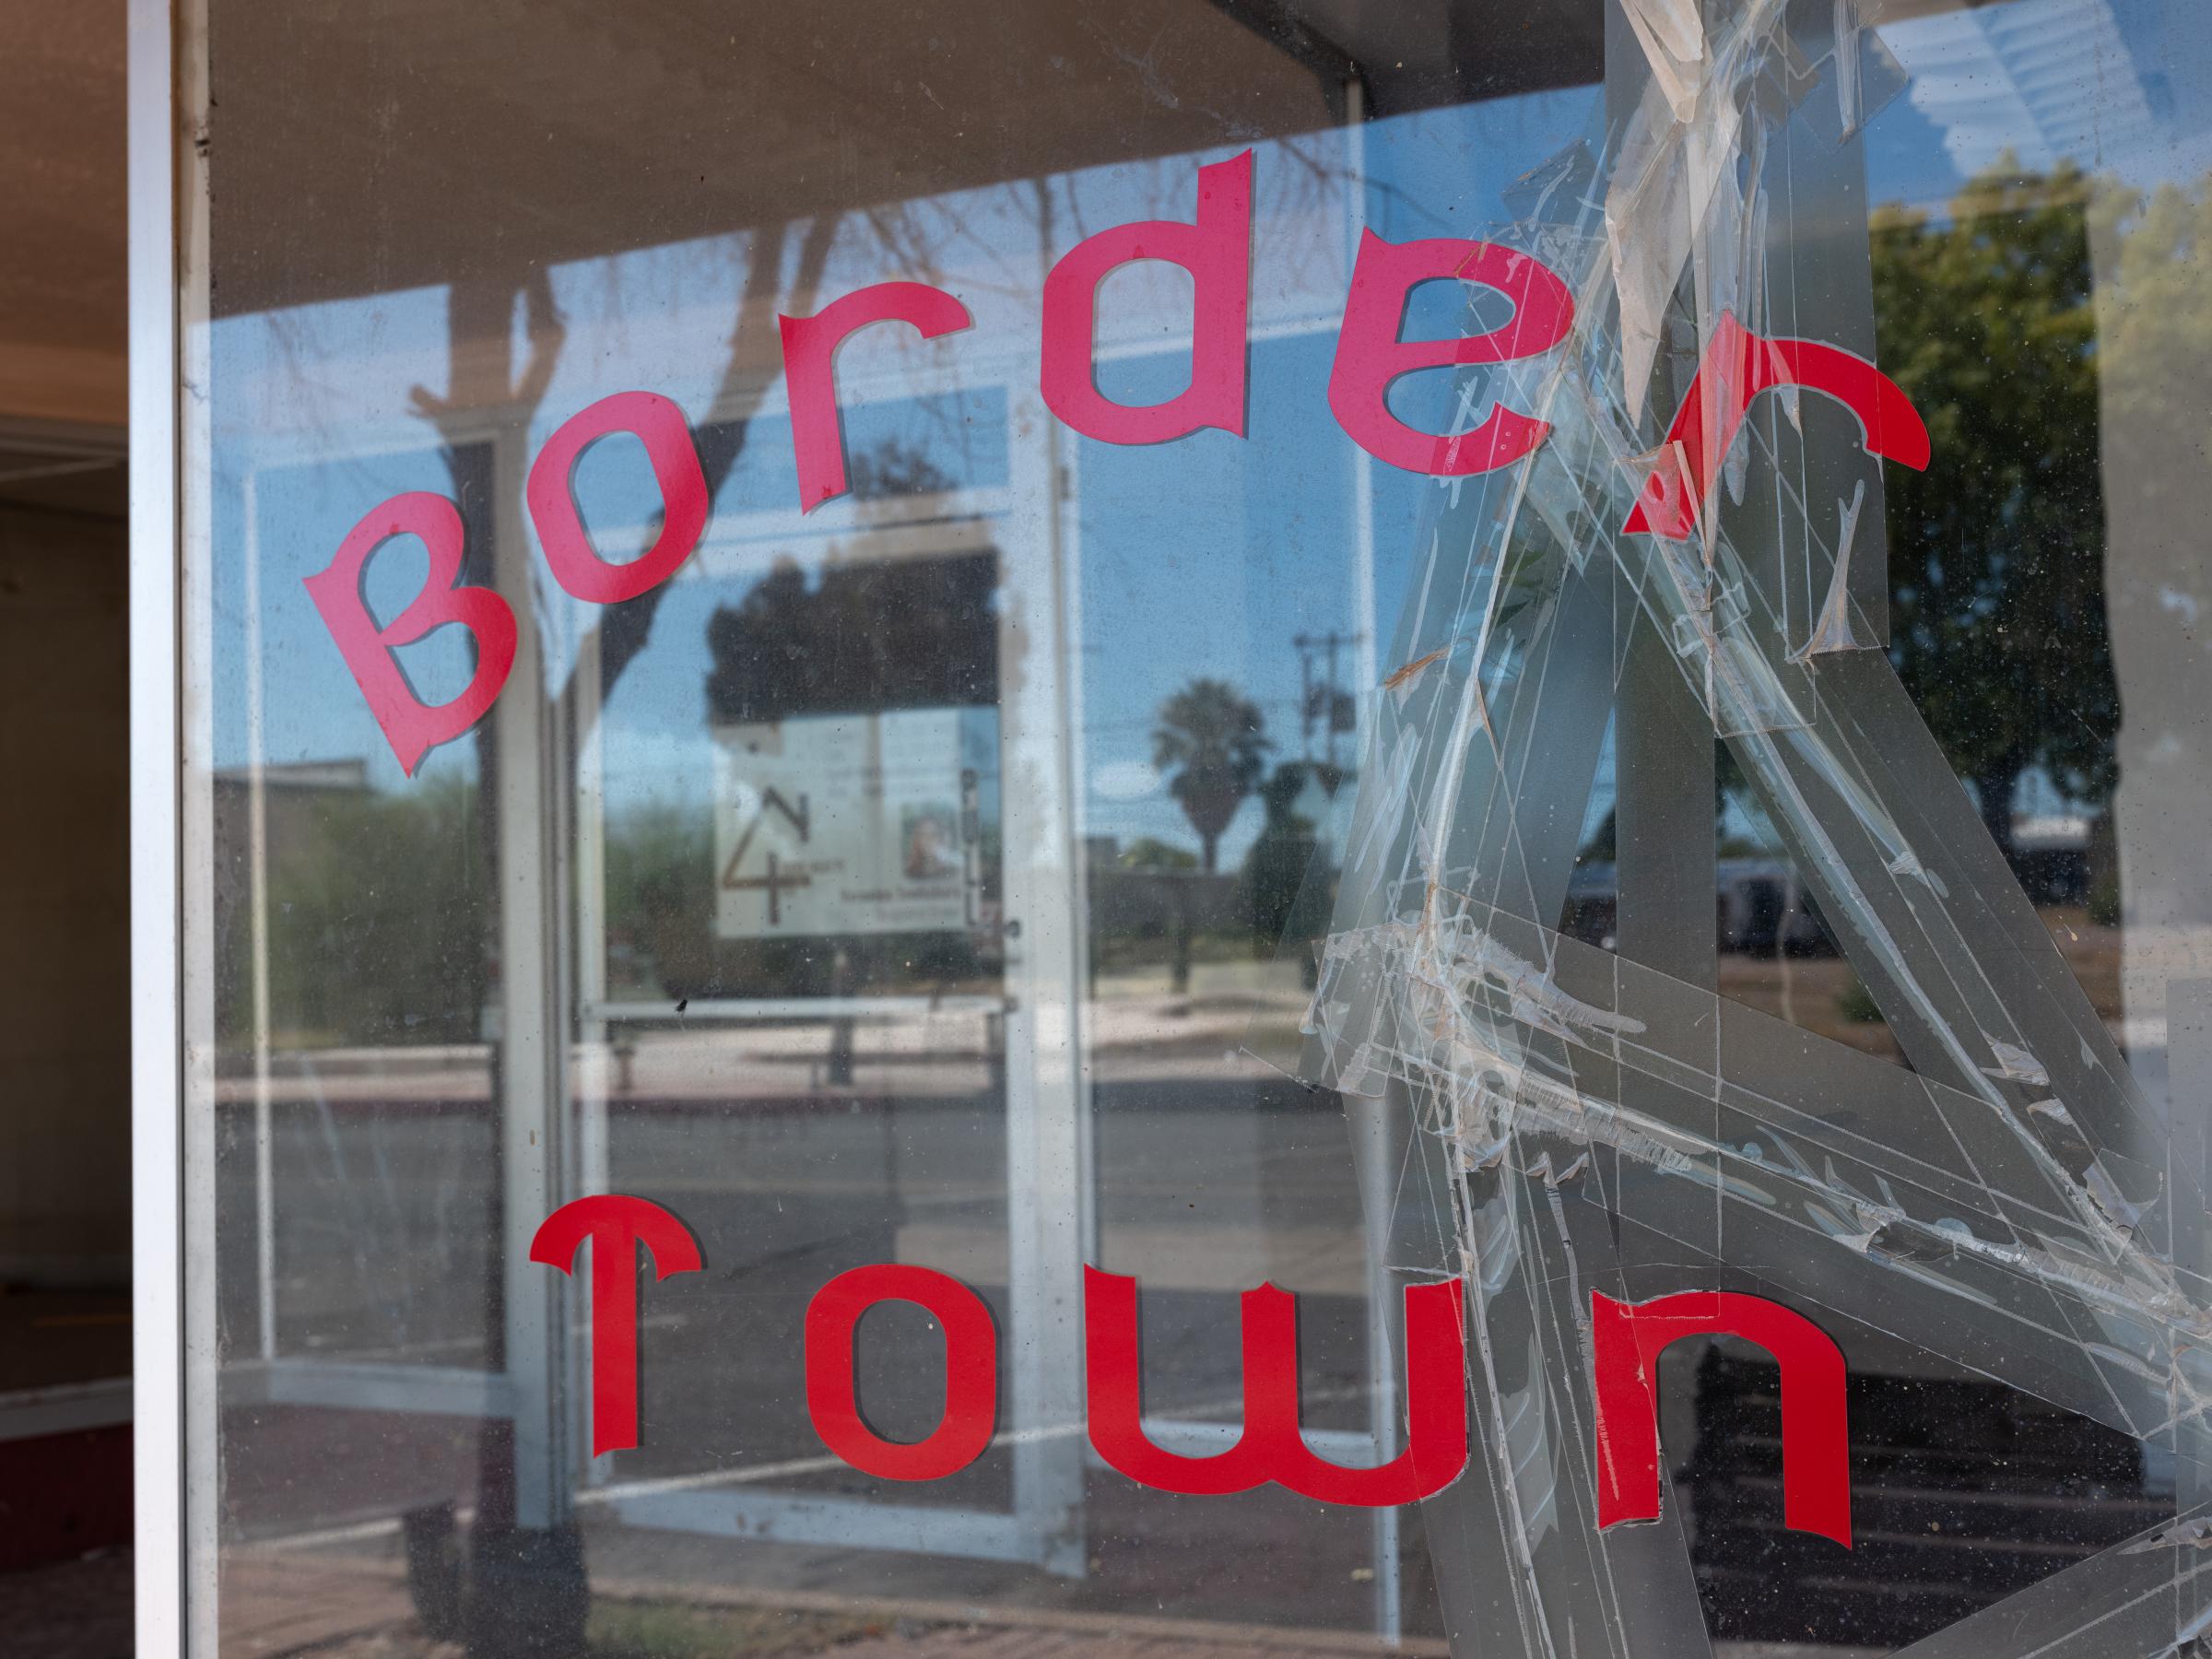 Social Media Migrant Smuggling - Bloomberg Businessweek - A shop window in the historic section of Douglas, AZ, on...